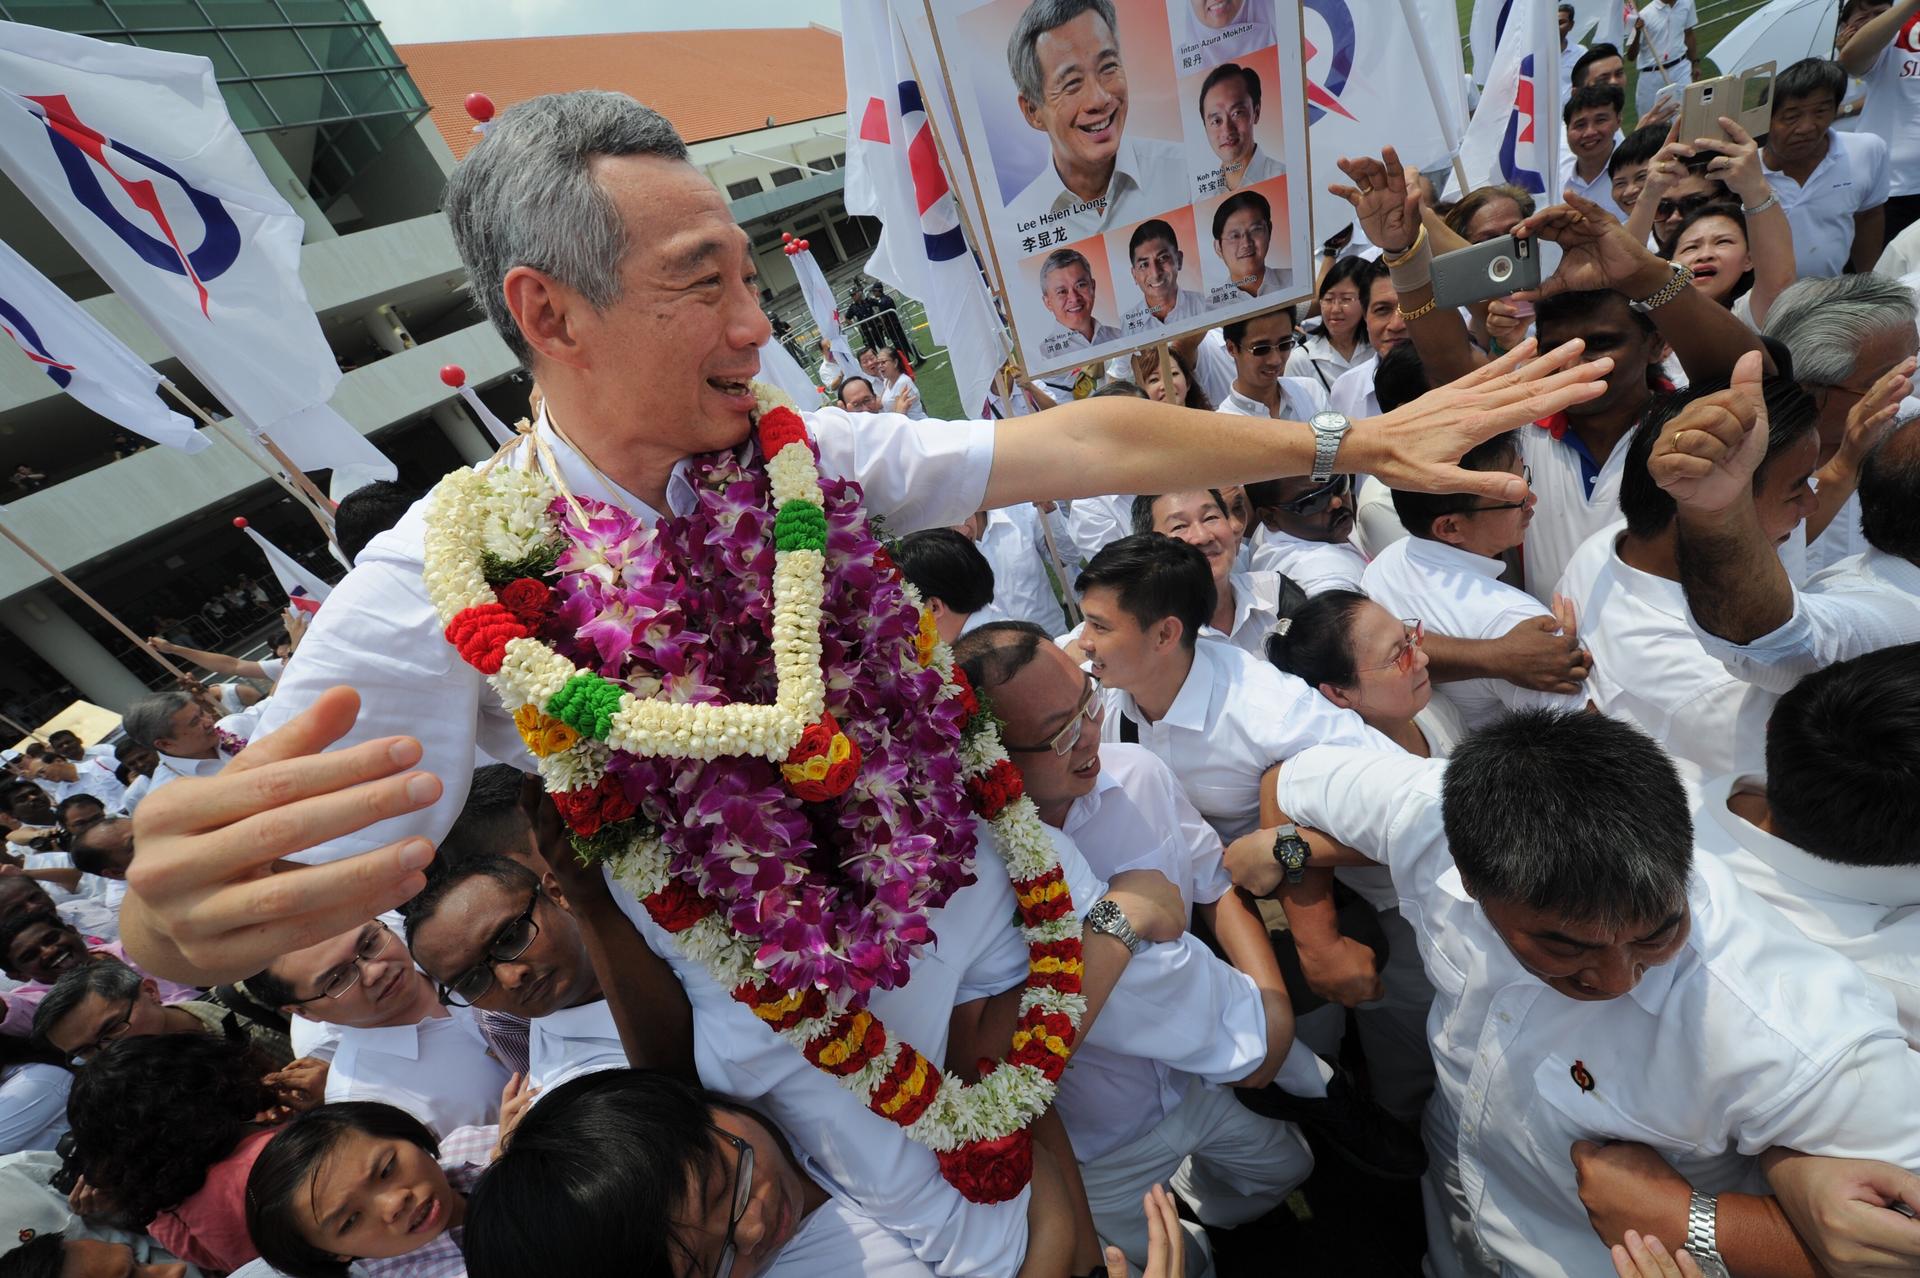 Singapore's Prime Minister Lee Hsien Loong interacts with supporters of his People's Action Party as campaigning begins. Photo: Xinhua